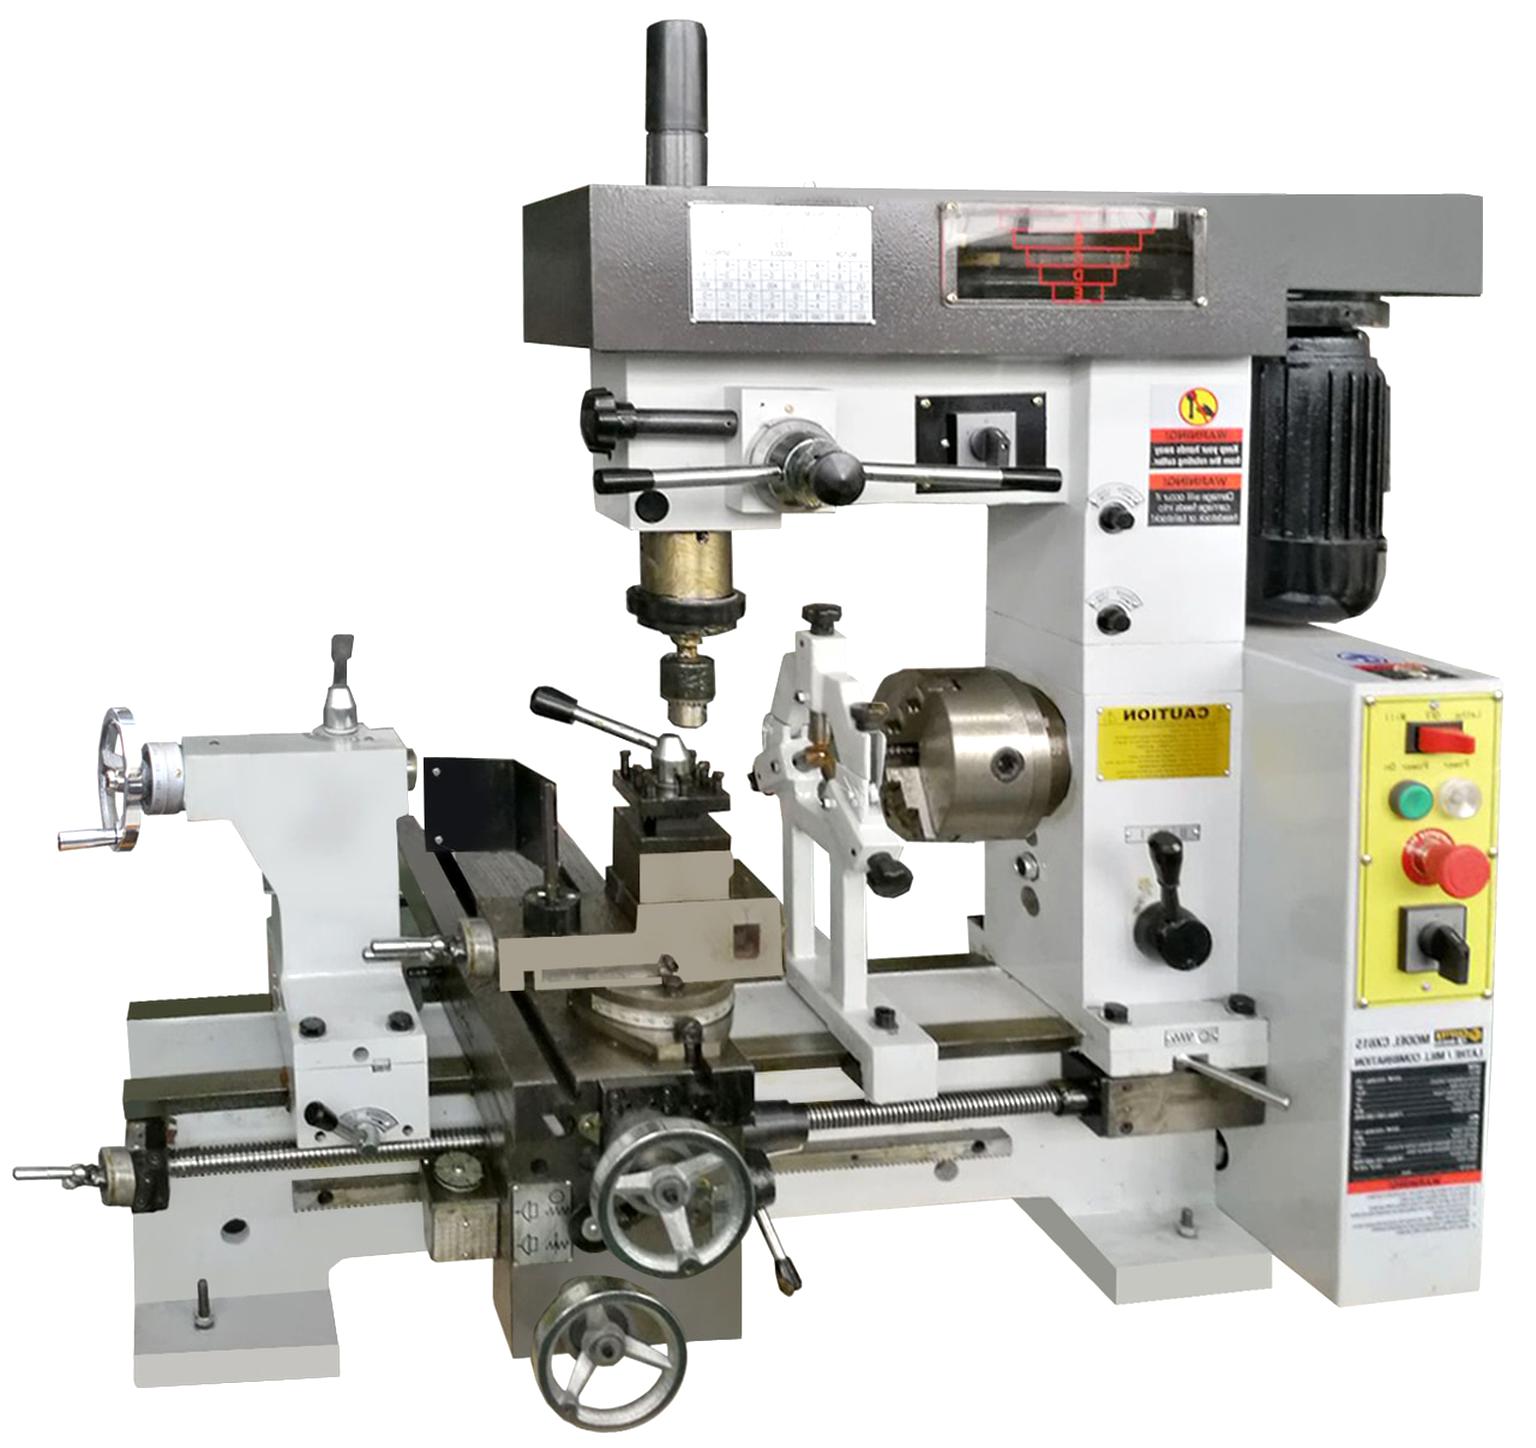 Lathe Milling Machine for sale in UK View 29 bargains